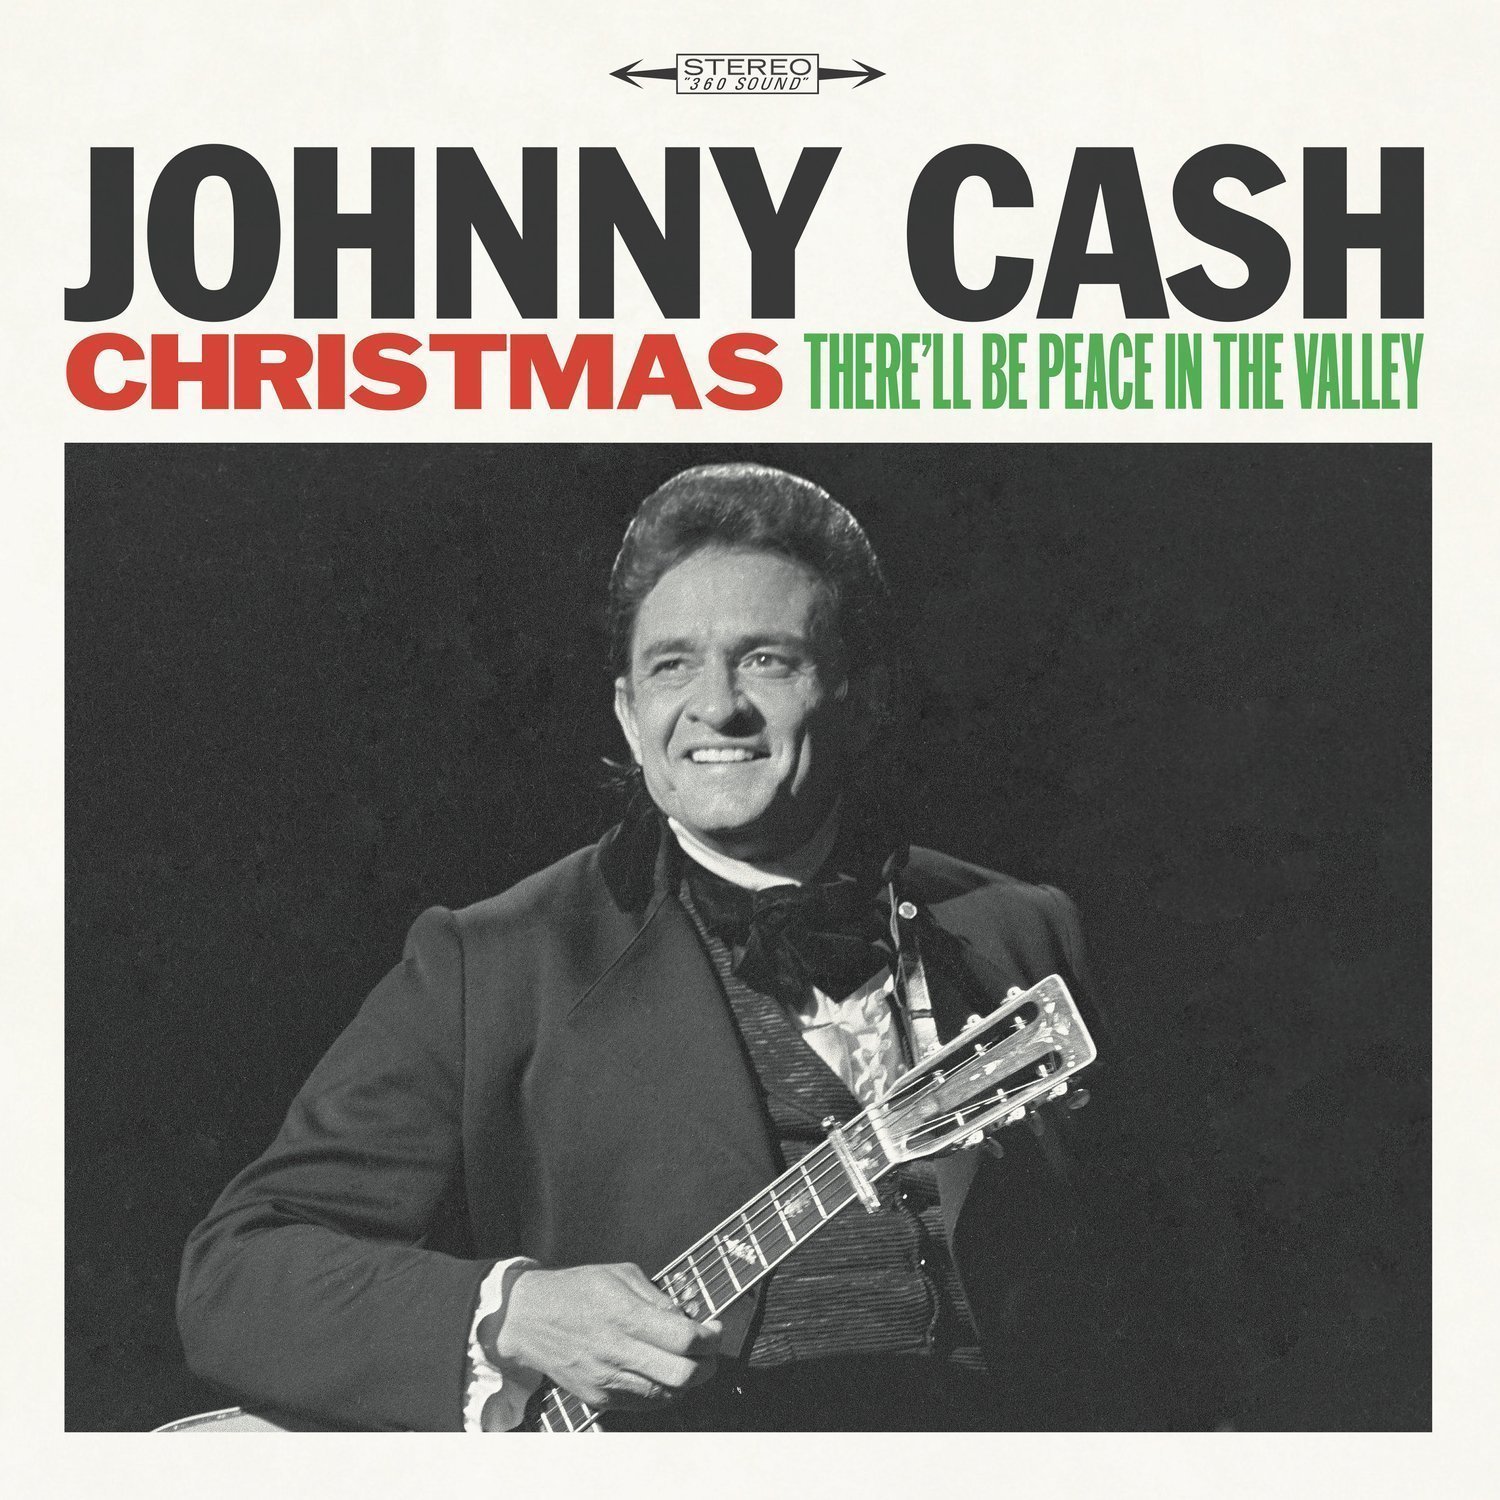 Vinyl Record Johnny Cash Christmas: There'll Be Peace In the Valley (LP)